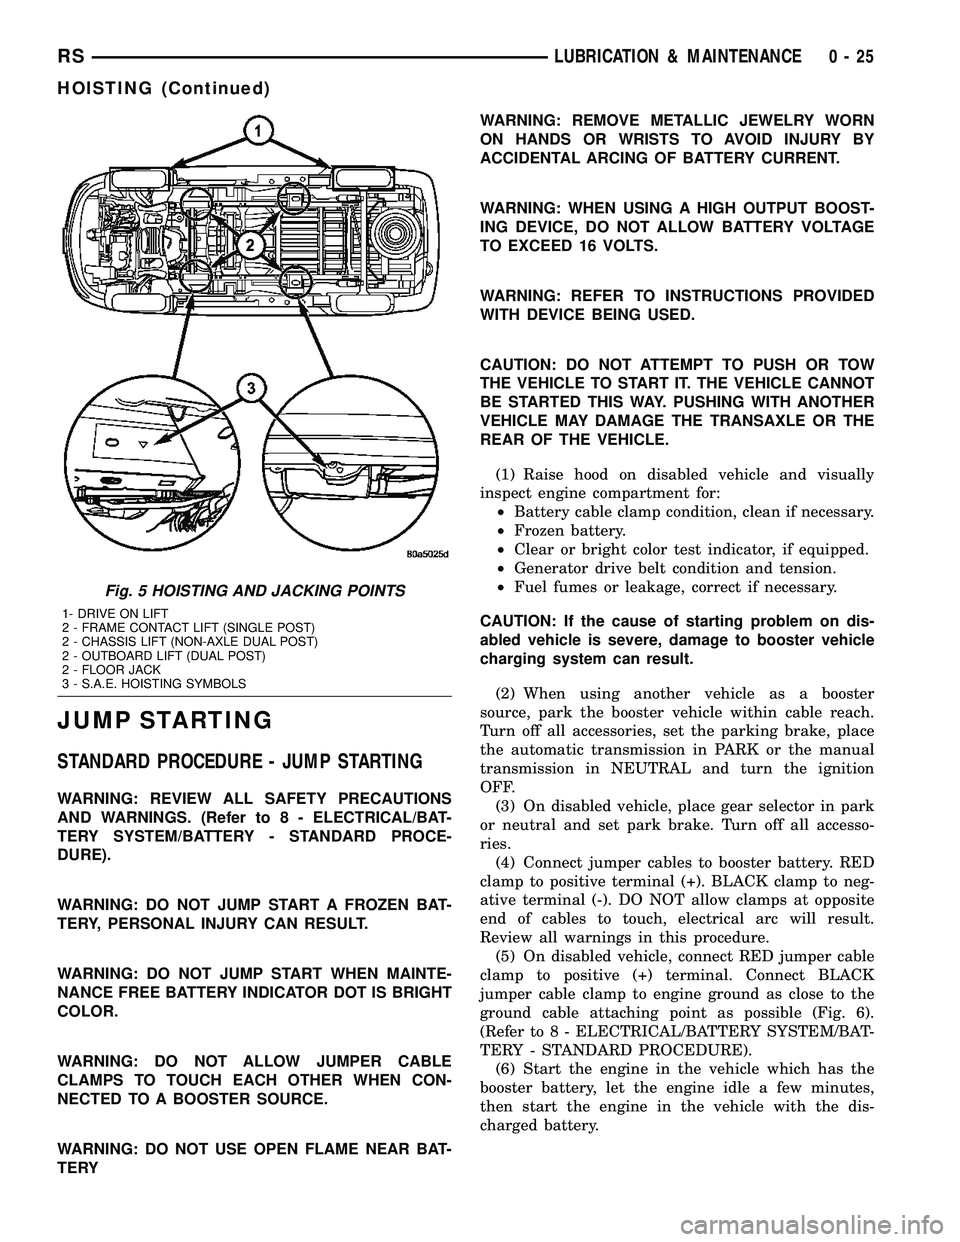 CHRYSLER CARAVAN 2005  Service Manual JUMP STARTING
STANDARD PROCEDURE - JUMP STARTING
WARNING: REVIEW ALL SAFETY PRECAUTIONS
AND WARNINGS. (Refer to 8 - ELECTRICAL/BAT-
TERY SYSTEM/BATTERY - STANDARD PROCE-
DURE).
WARNING: DO NOT JUMP ST